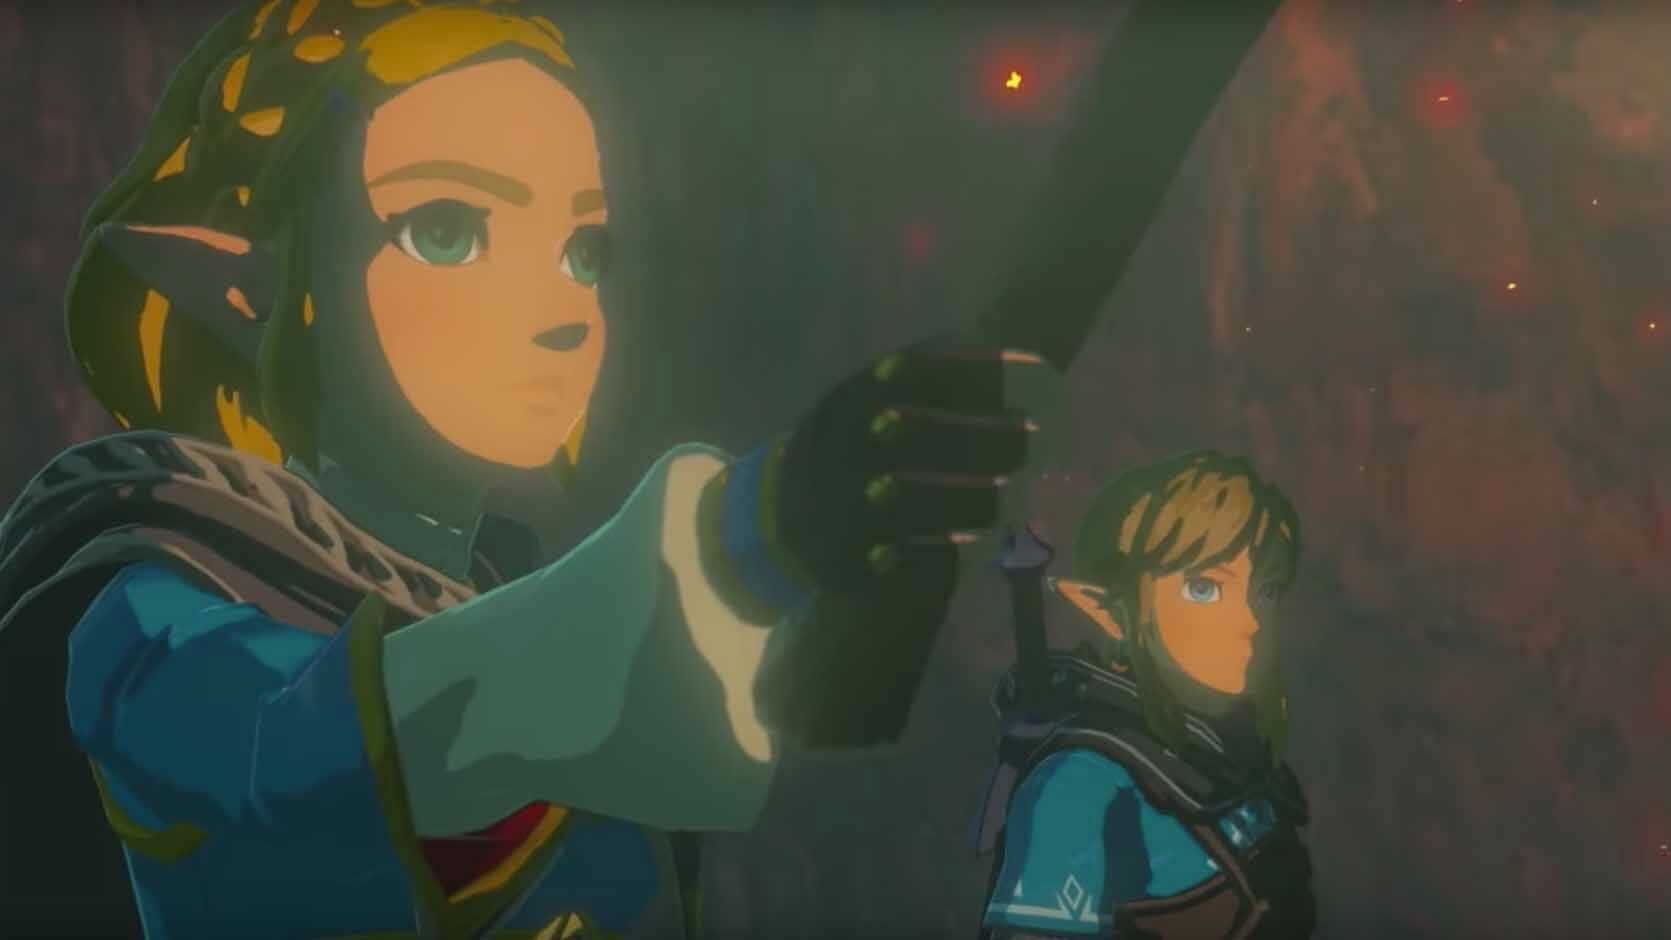 Breath of the Wild sequel details revealed – UPDATE: It’s not that new